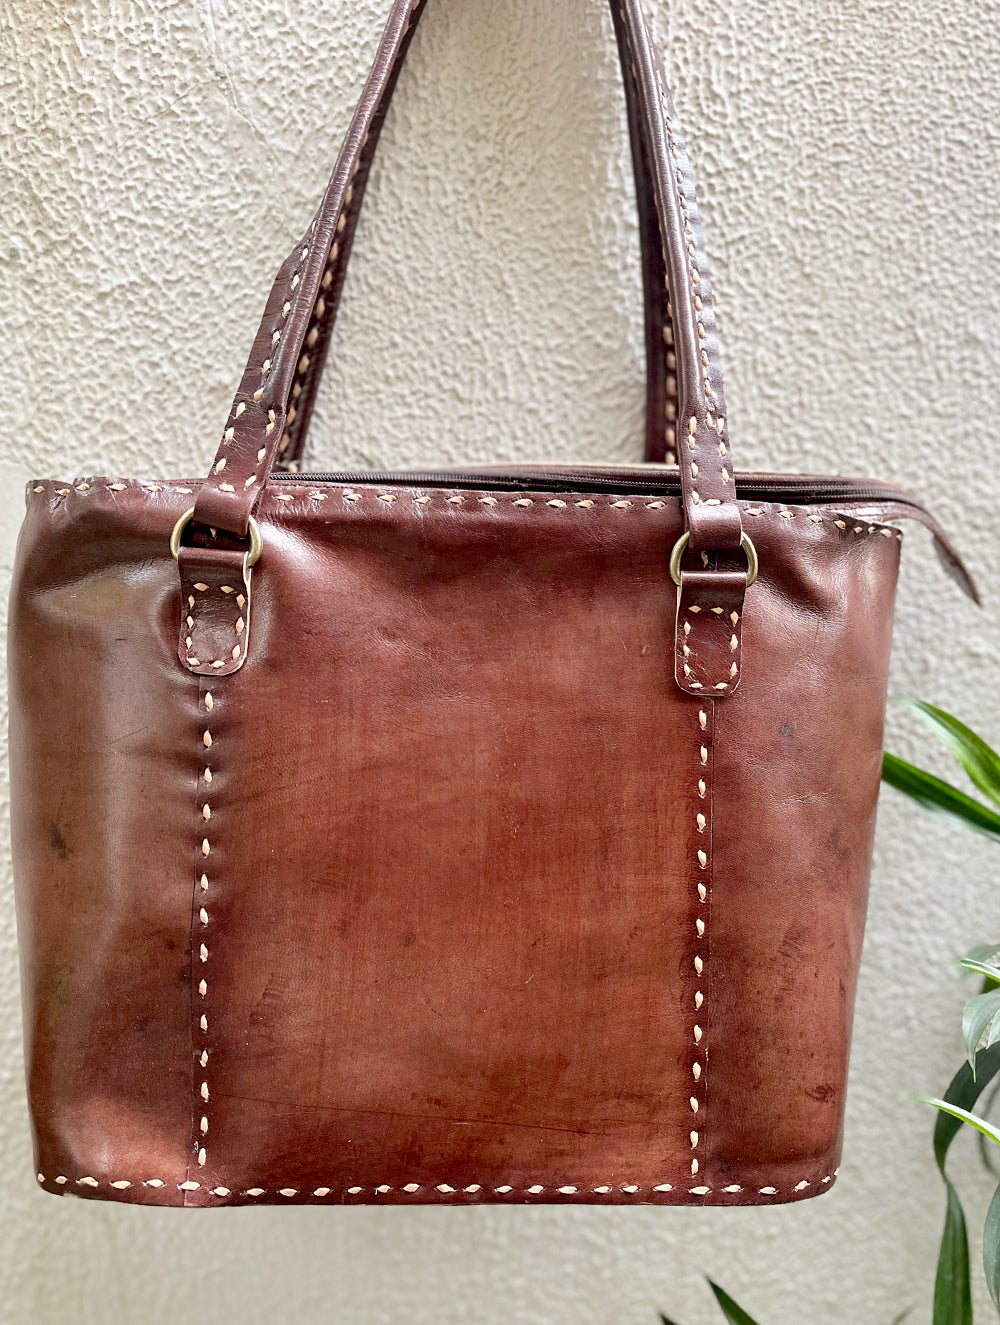 Load image into Gallery viewer, Handcrafted Jawaja Leather Tote with Stitched Detail